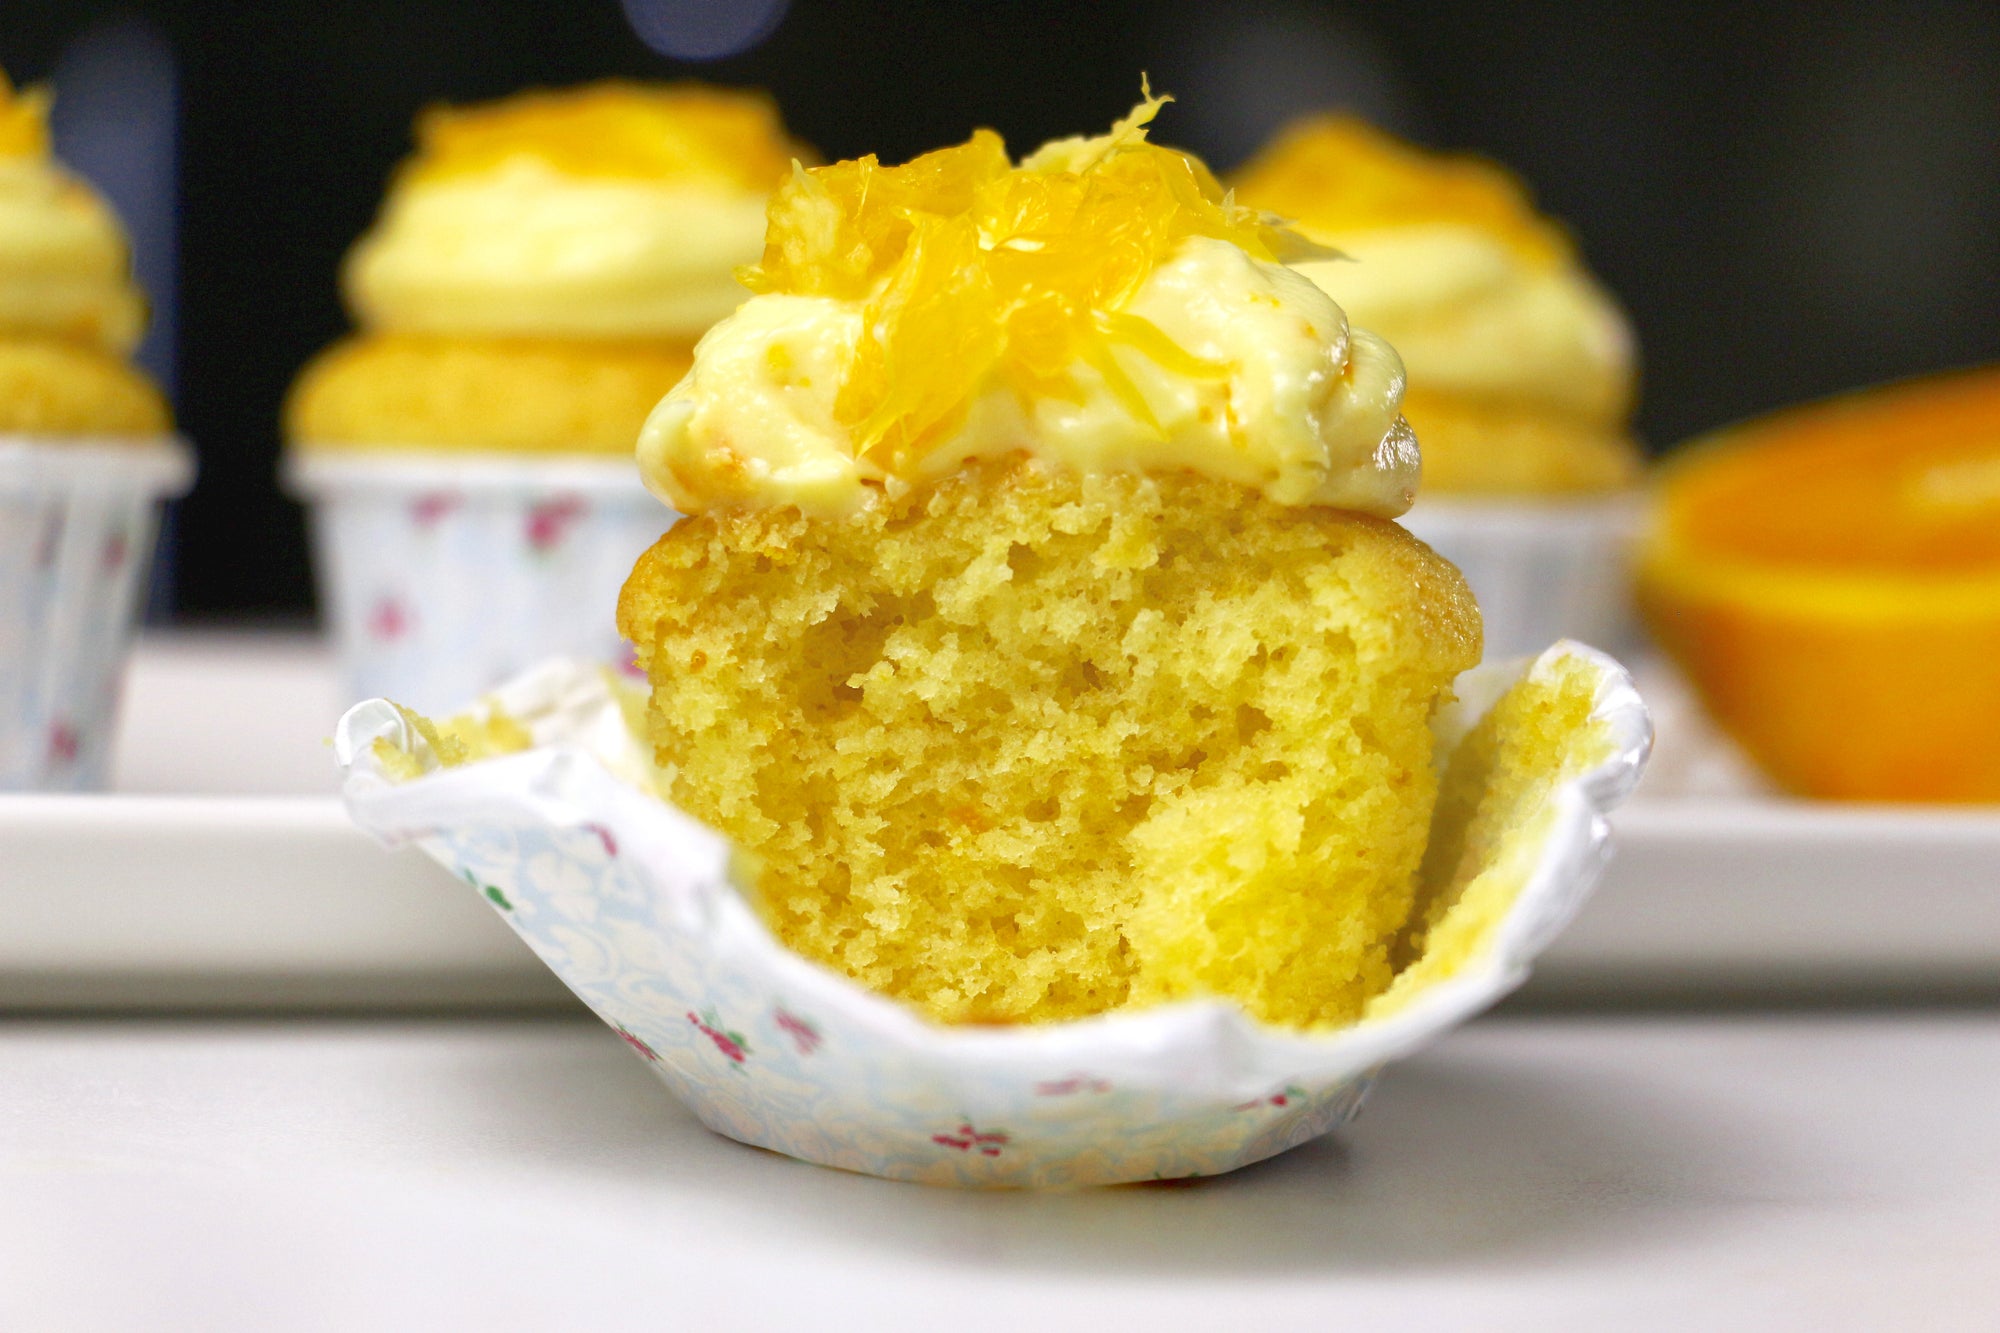 RECIPE: Mini Orange Cupcakes with Orange Cream Cheese Frosting—Zesty Cupcakes Made With Freshly Squeezed Oranges